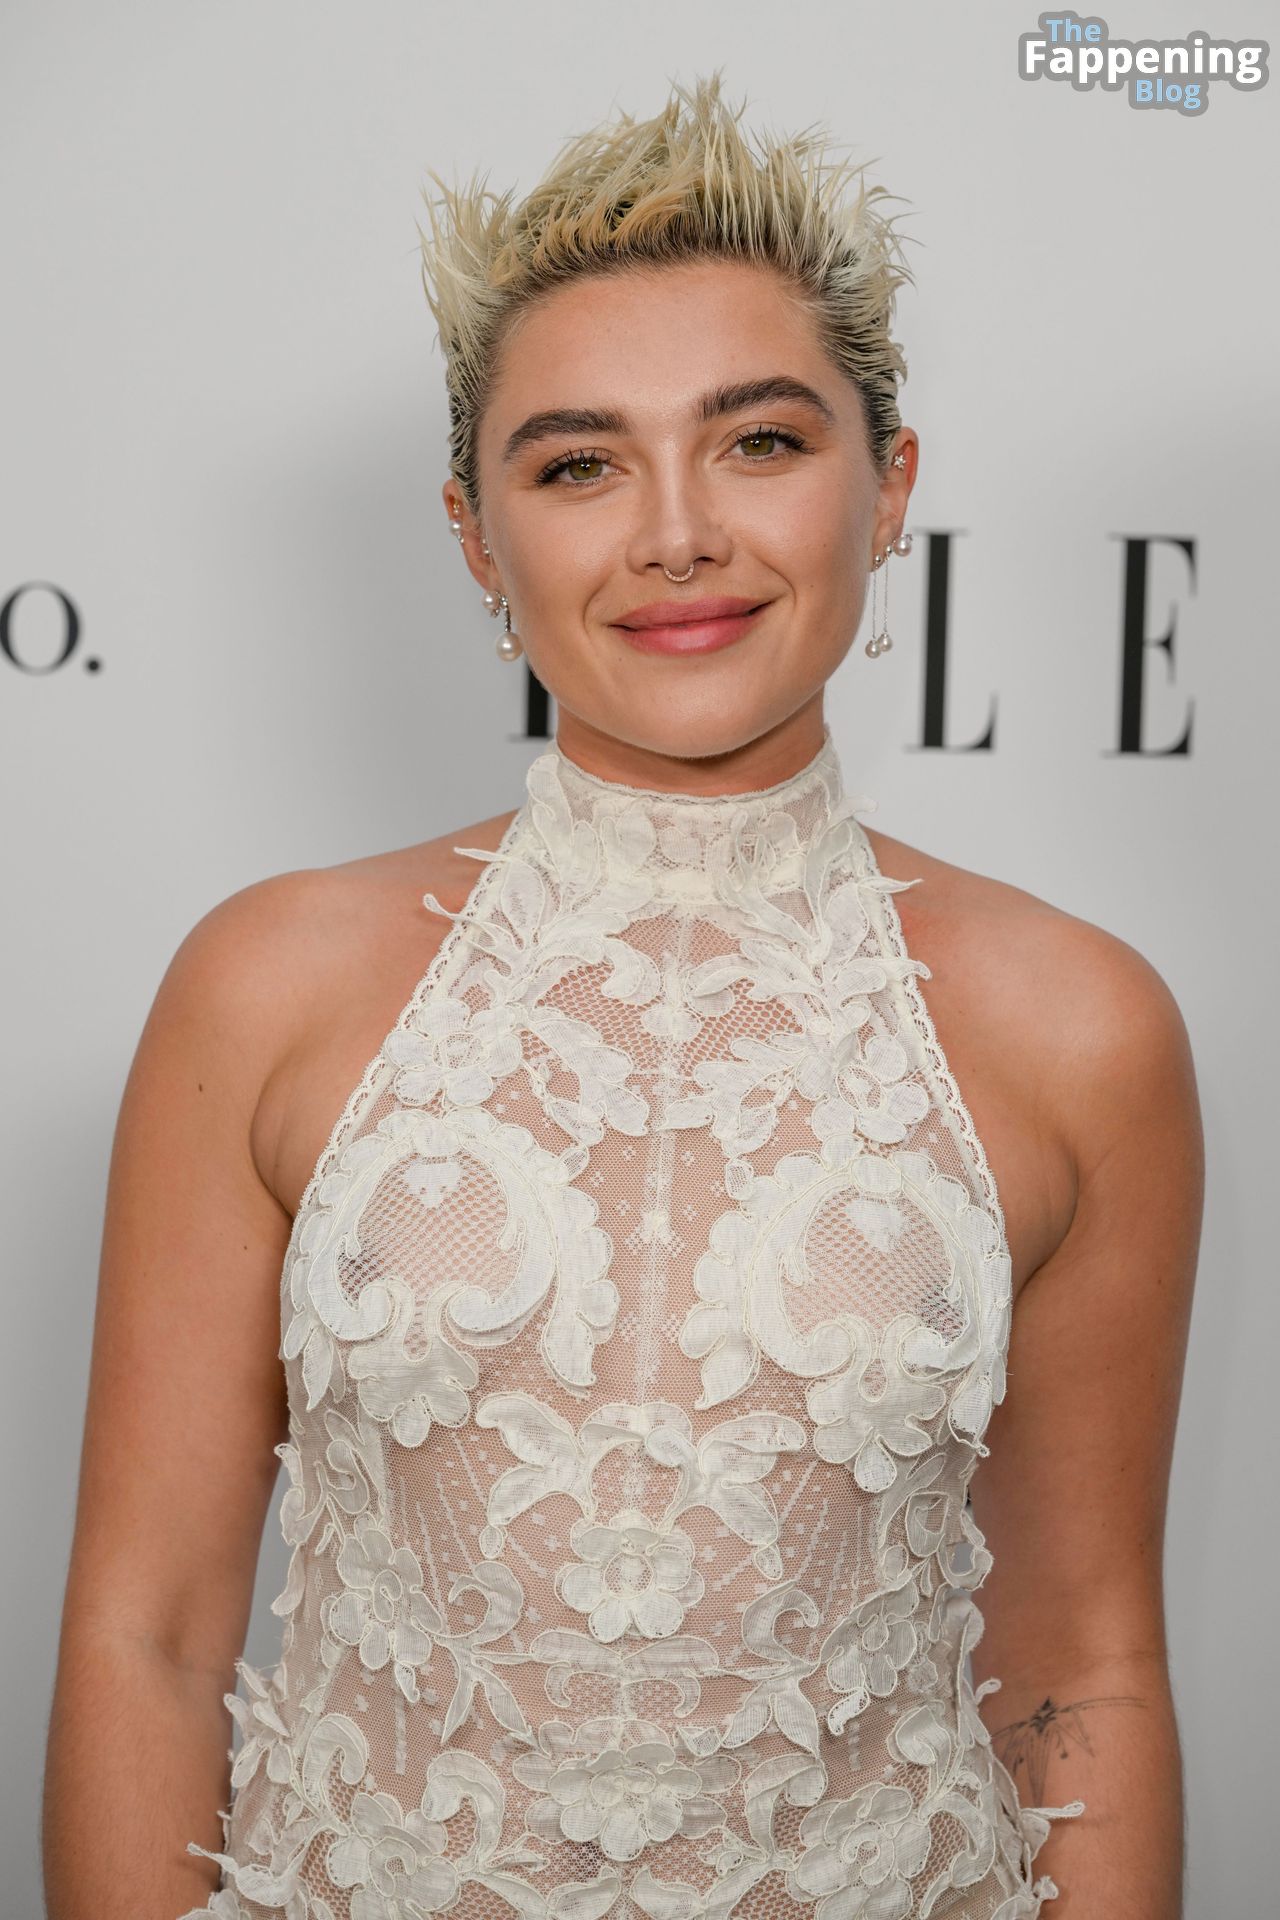 Florence-Pugh-Nude-Tits-50-The-Fappening-Blog.jpg